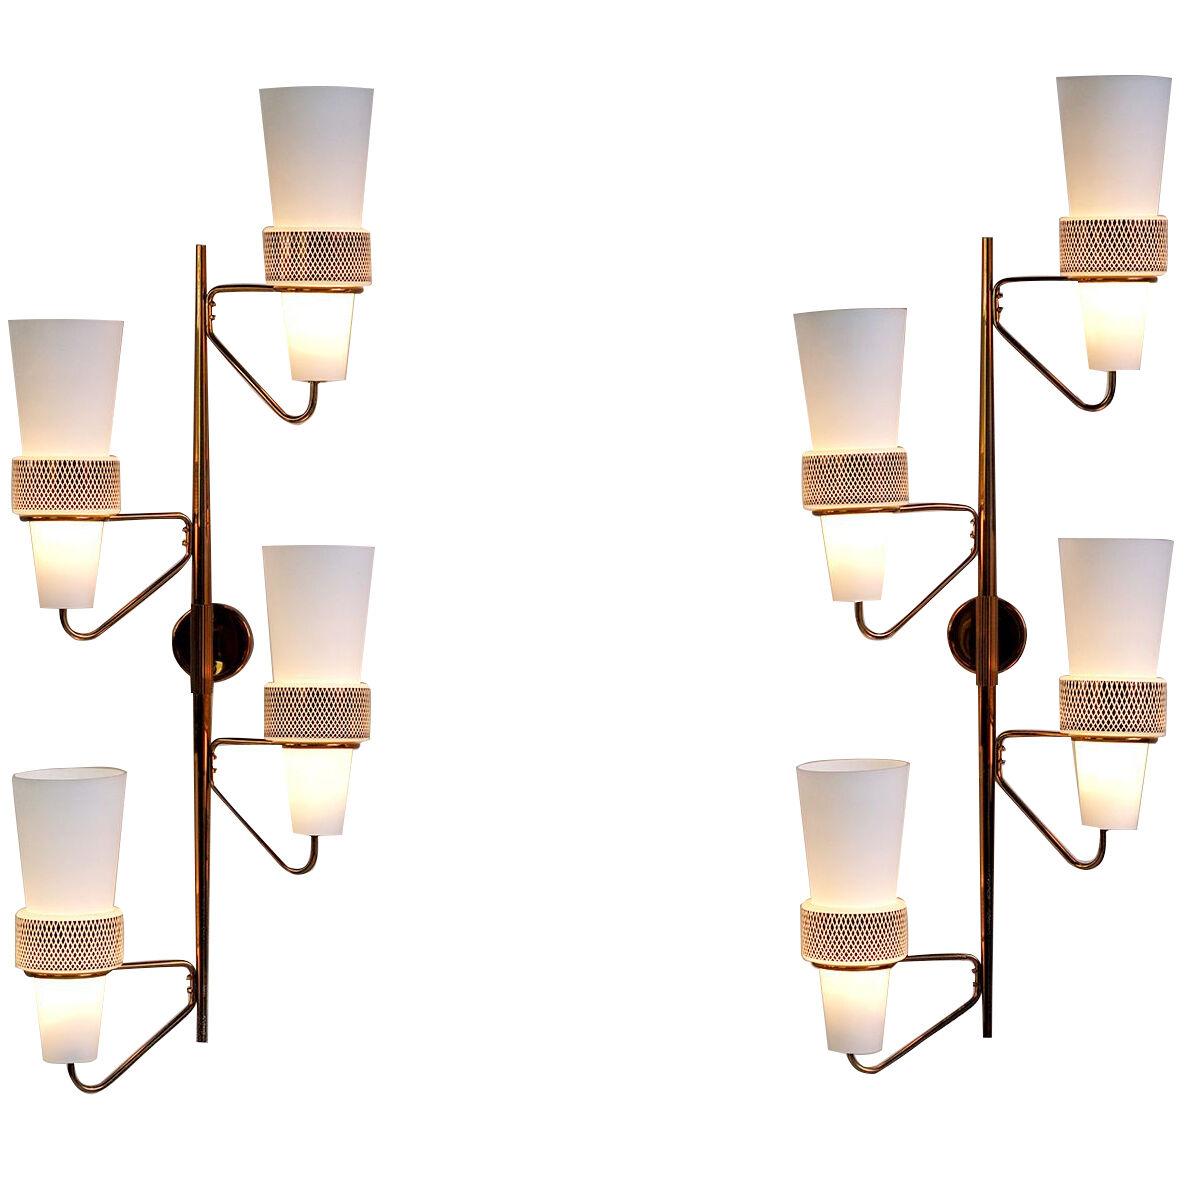 Pair of Large Wall Sconces 4 lights, France 1950